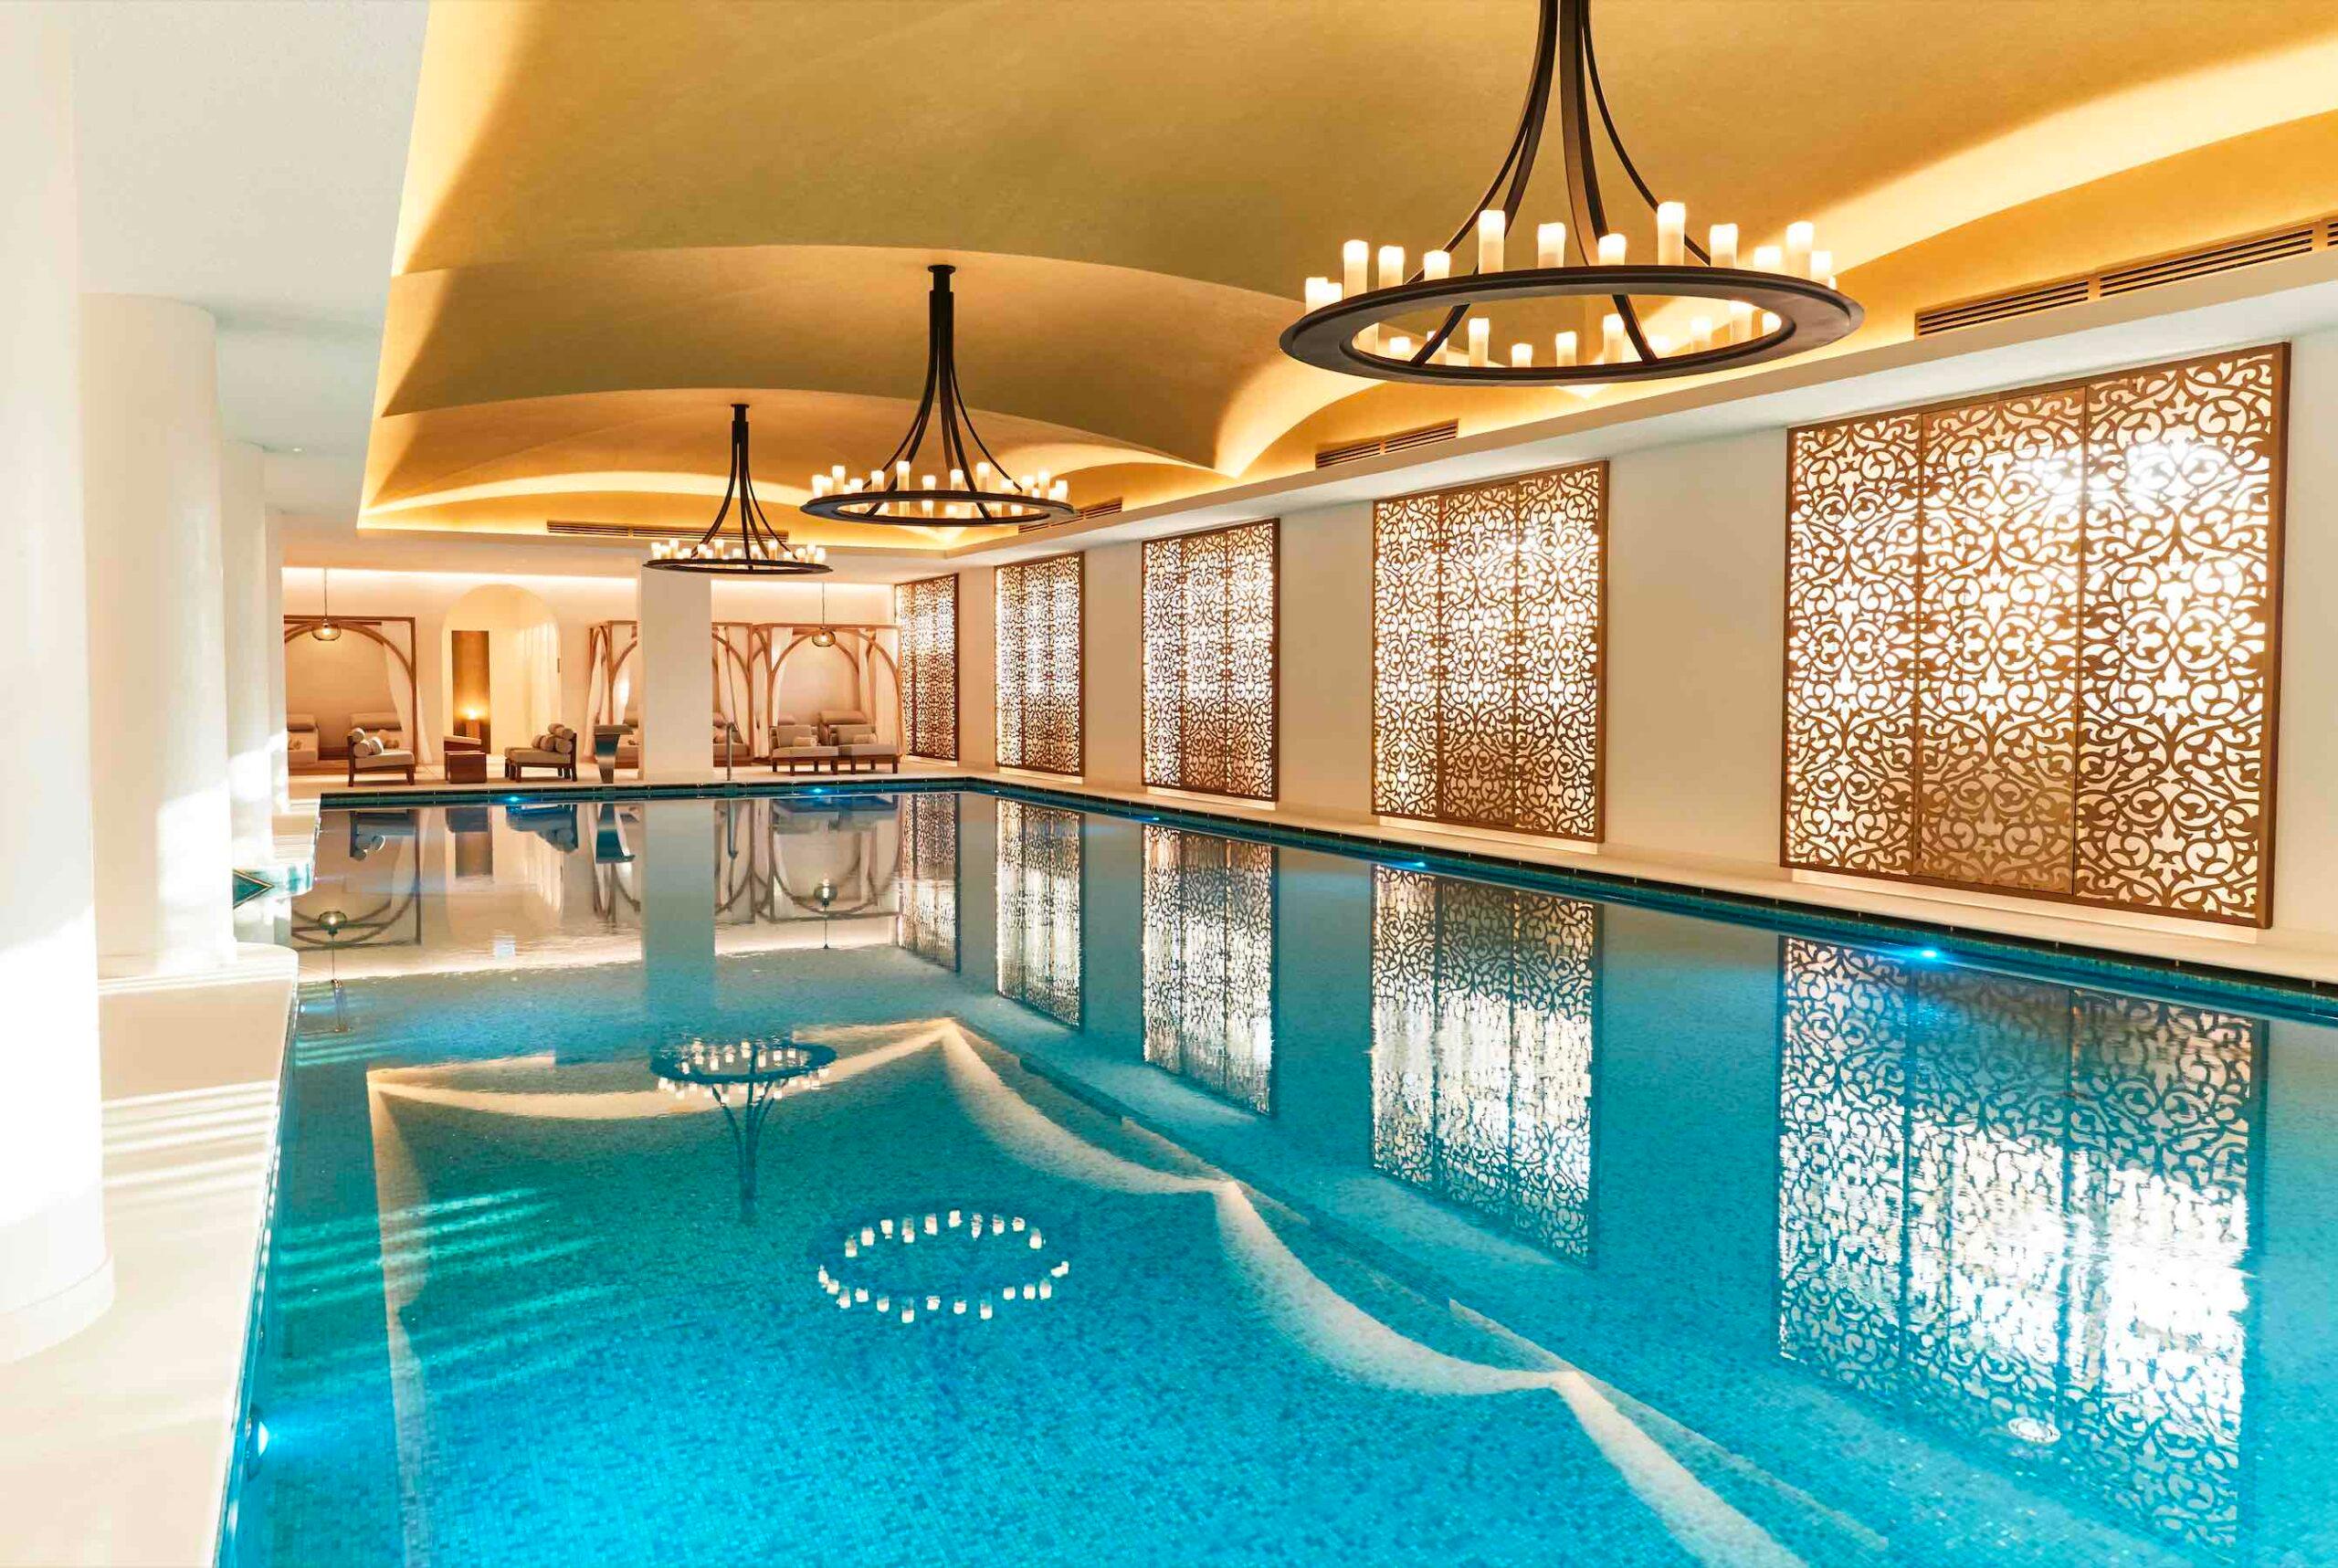 Cinq Mondes Spa Review: Unrivalled relaxation at Raffles The Palm Dubai-image